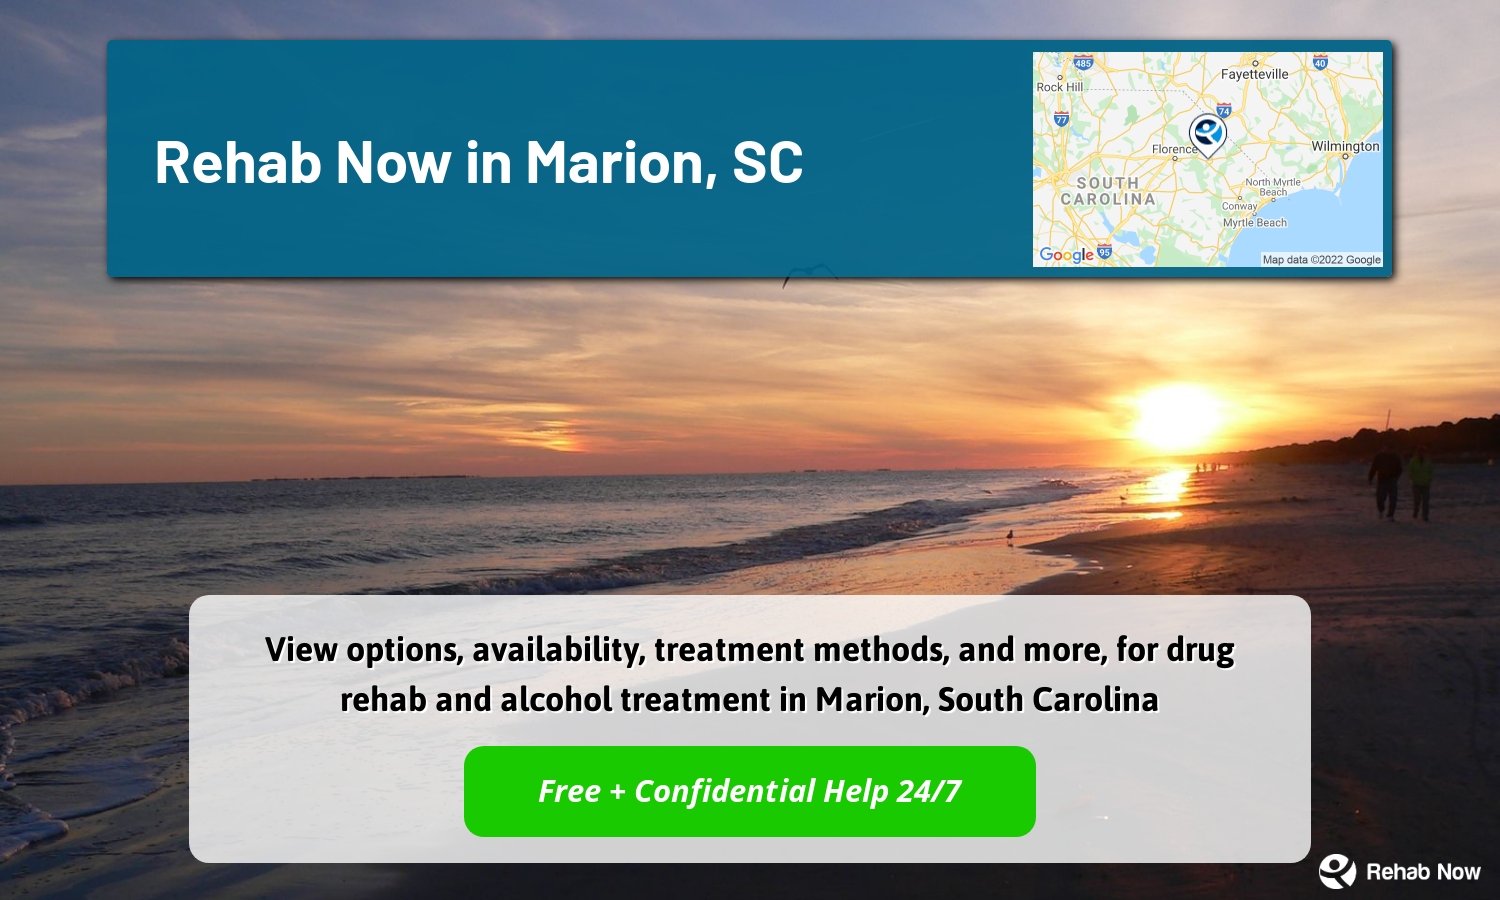 View options, availability, treatment methods, and more, for drug rehab and alcohol treatment in Marion, South Carolina